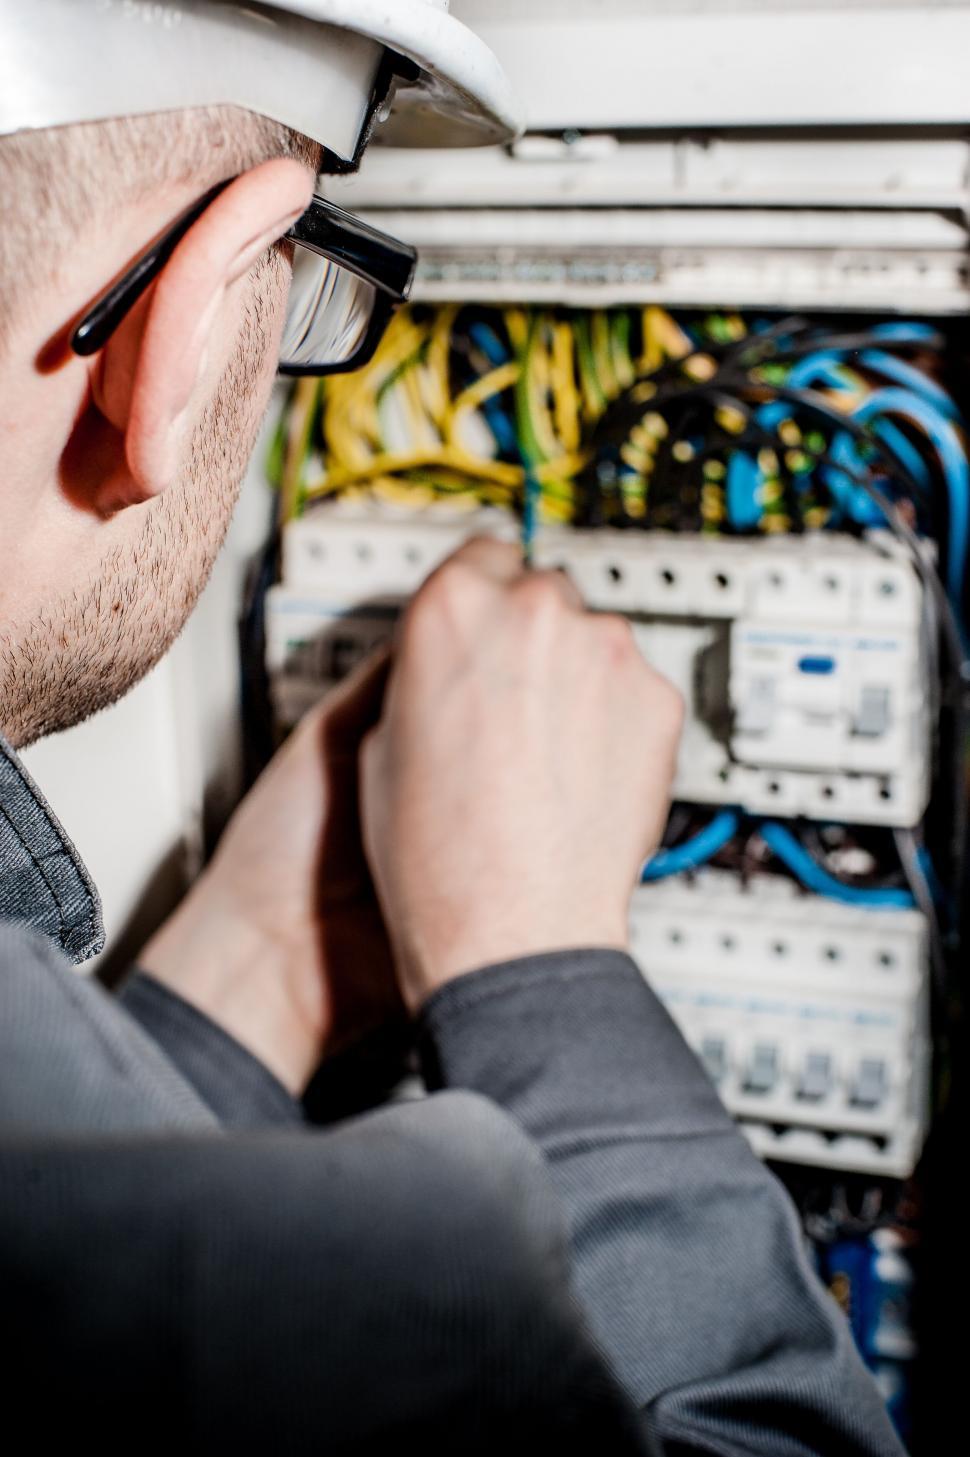 Why You Need an Electrical Inspection When Buying a Home